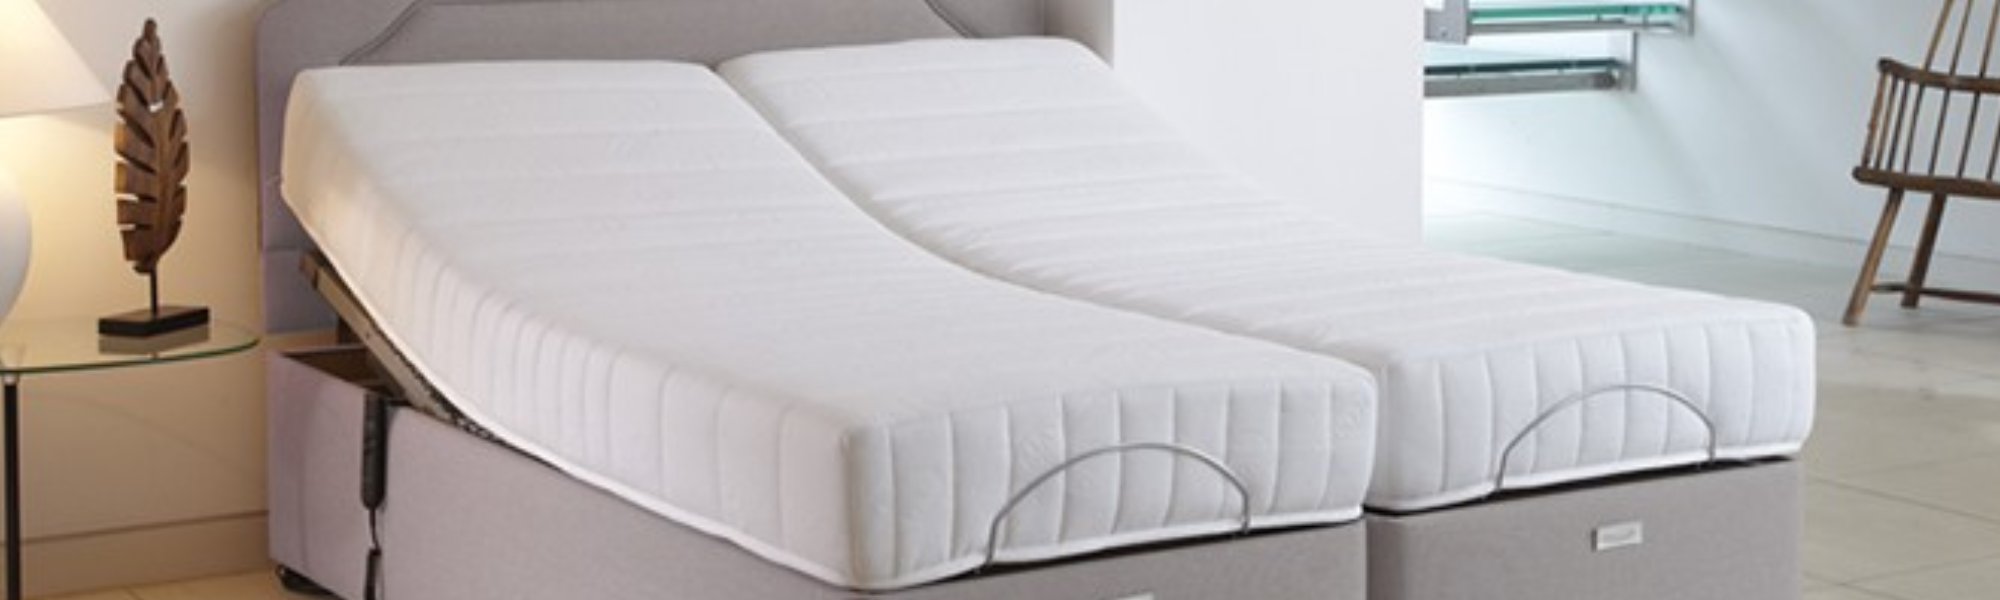 Super king electric beds